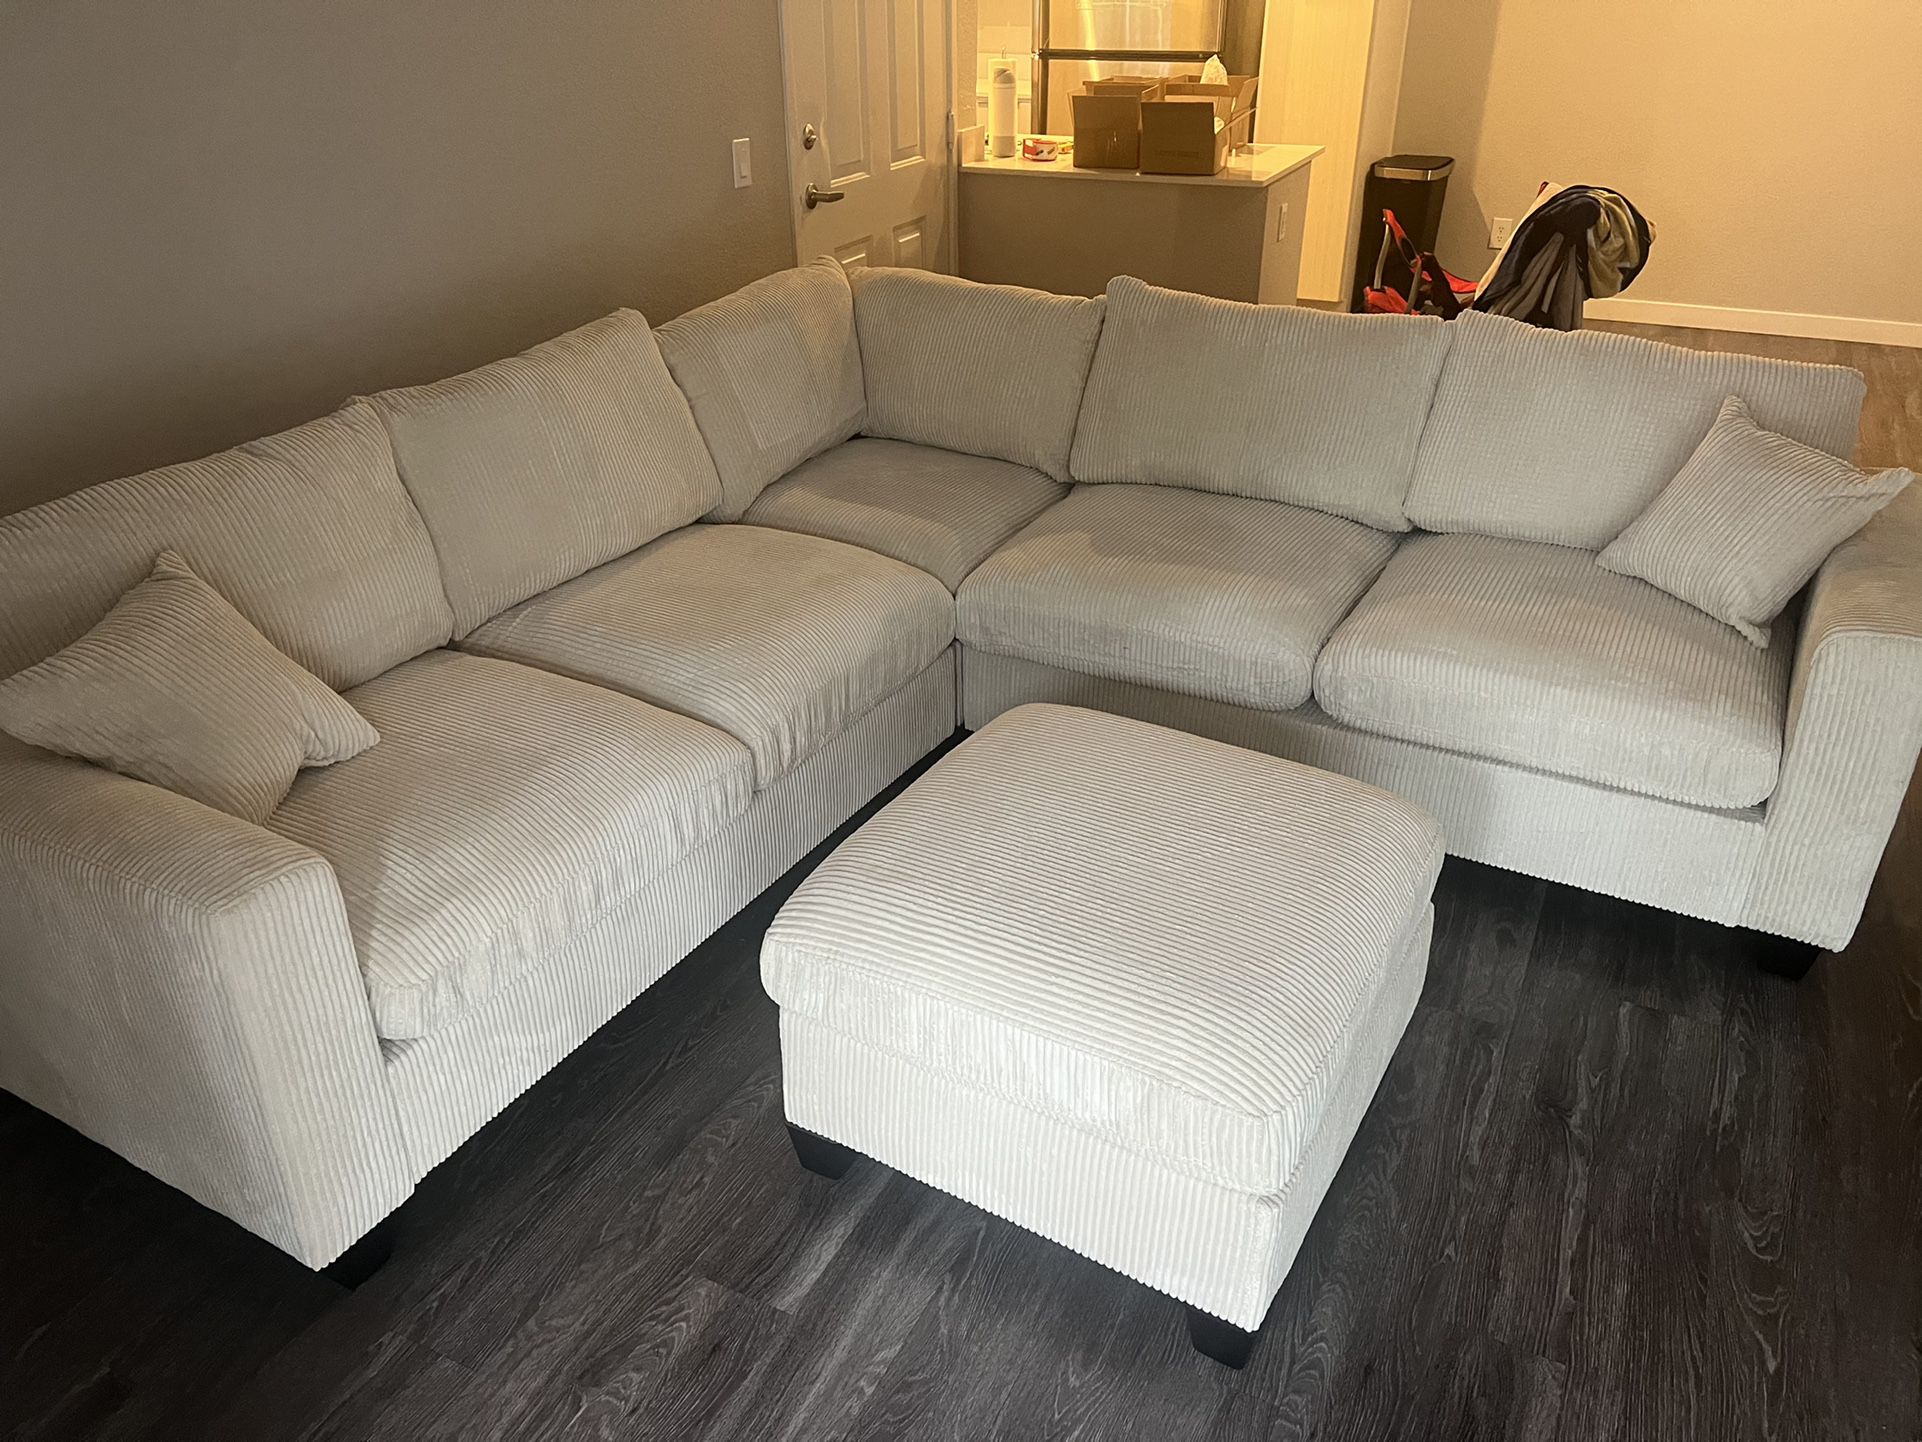 New 6 Piece Modular Sectional.  Off White / Beige Corduroy Fabric.  99” X  99”.  Free Delivery!